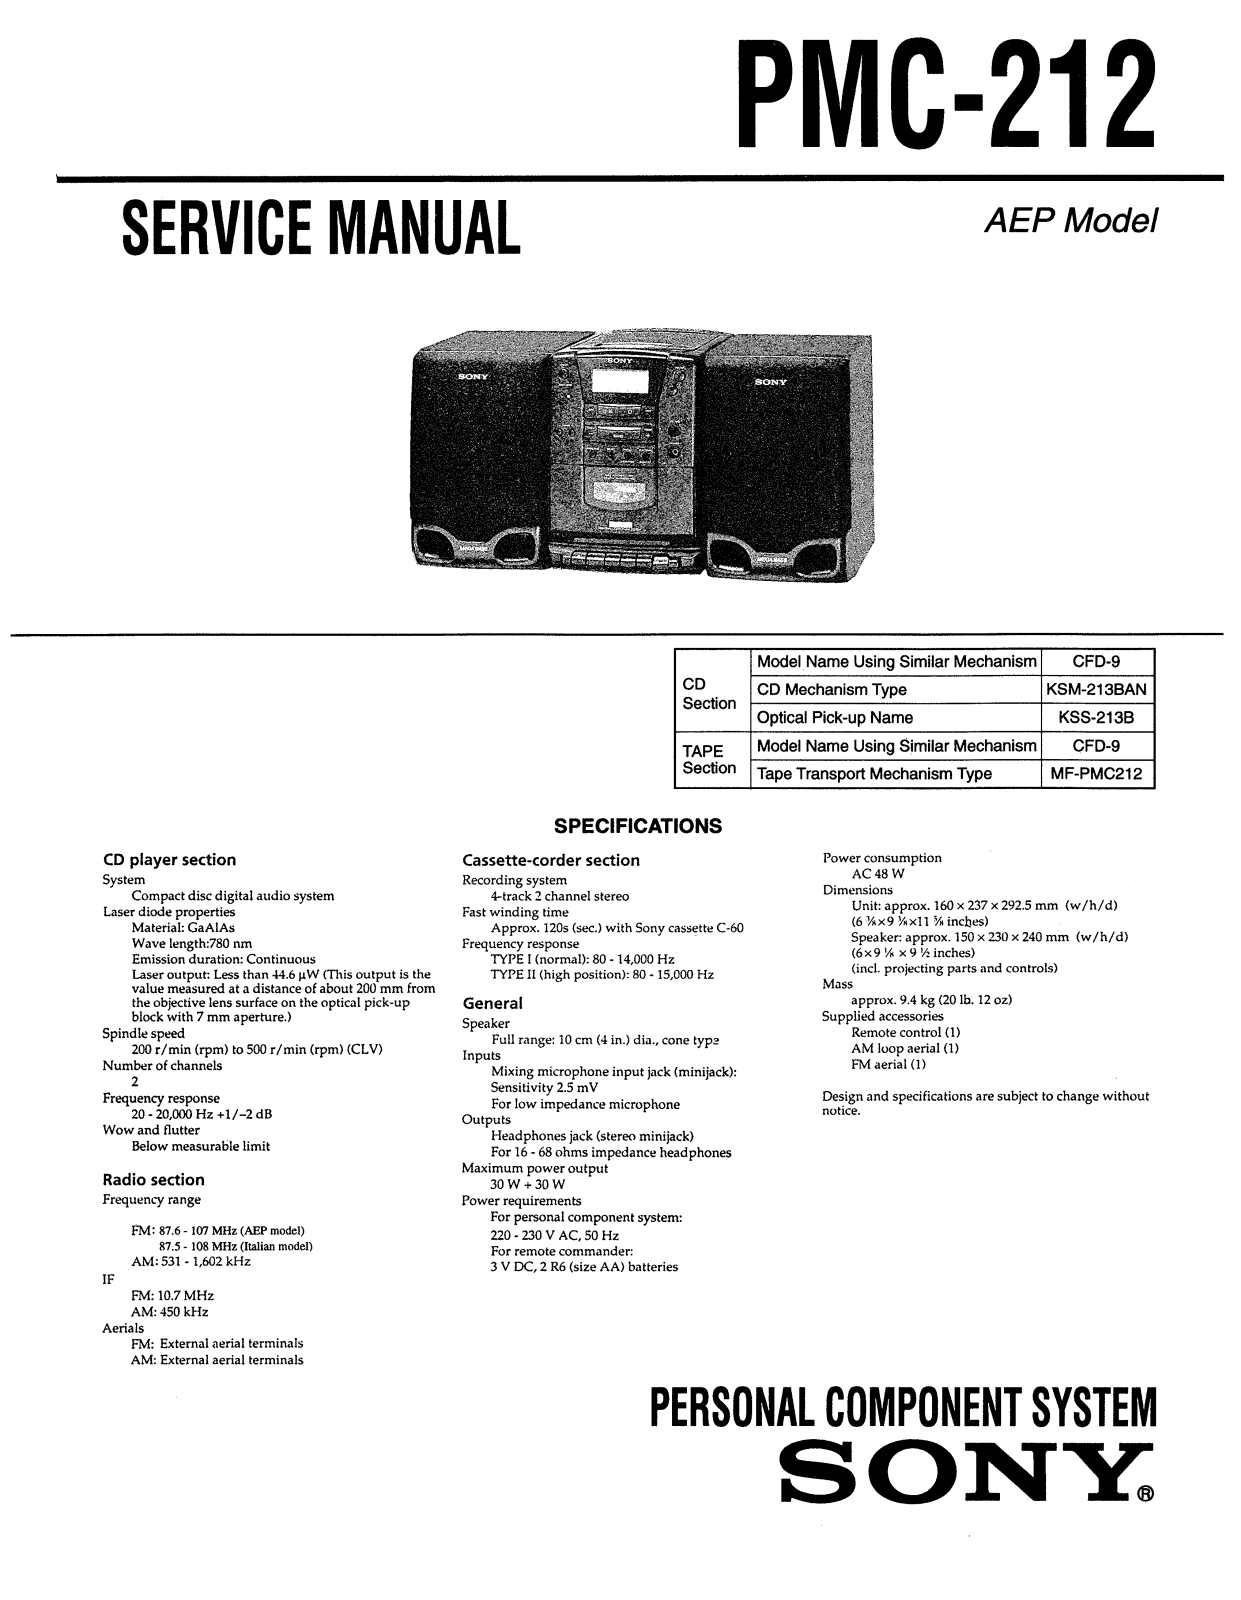 Sony PMC-212 Service manual